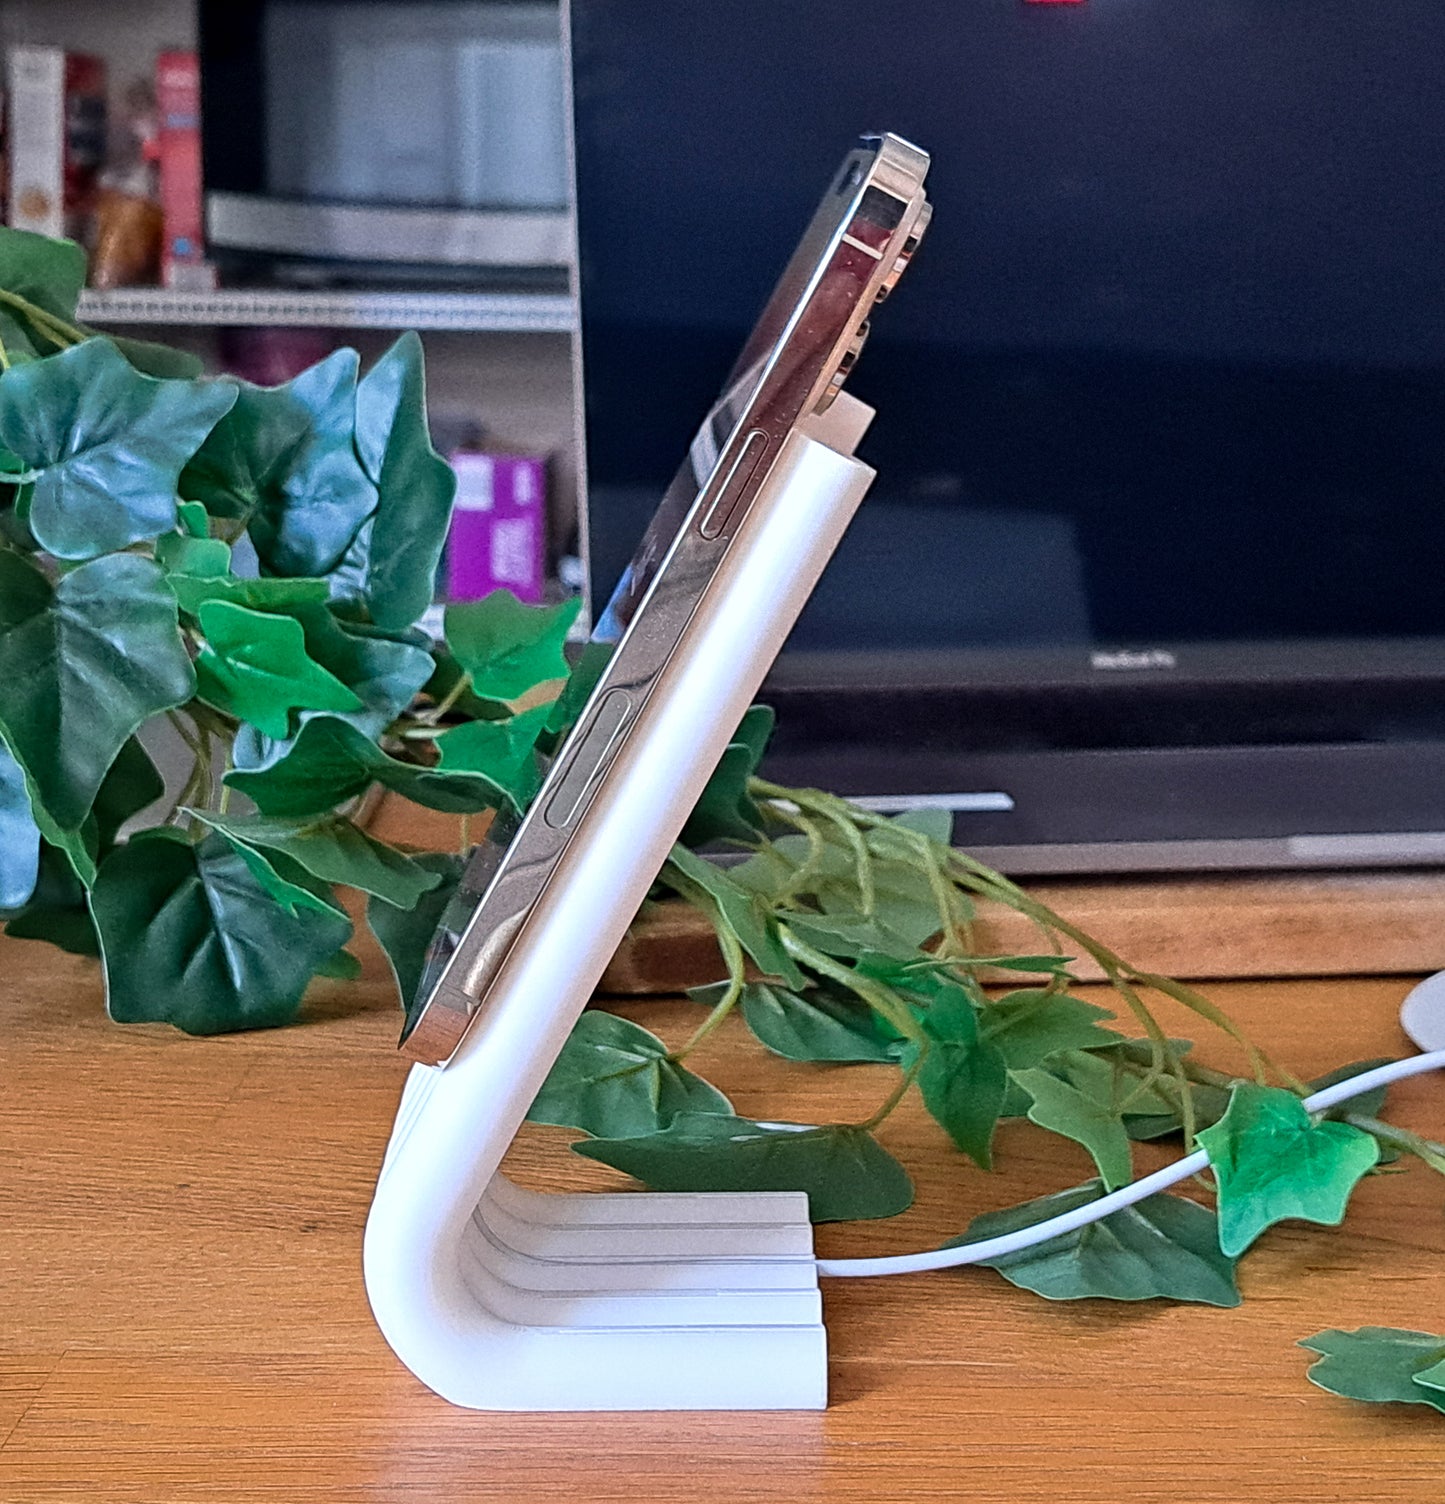 Stylish Apple iPhone MagSafe Stand - Seamless Charging, Multiple Colors